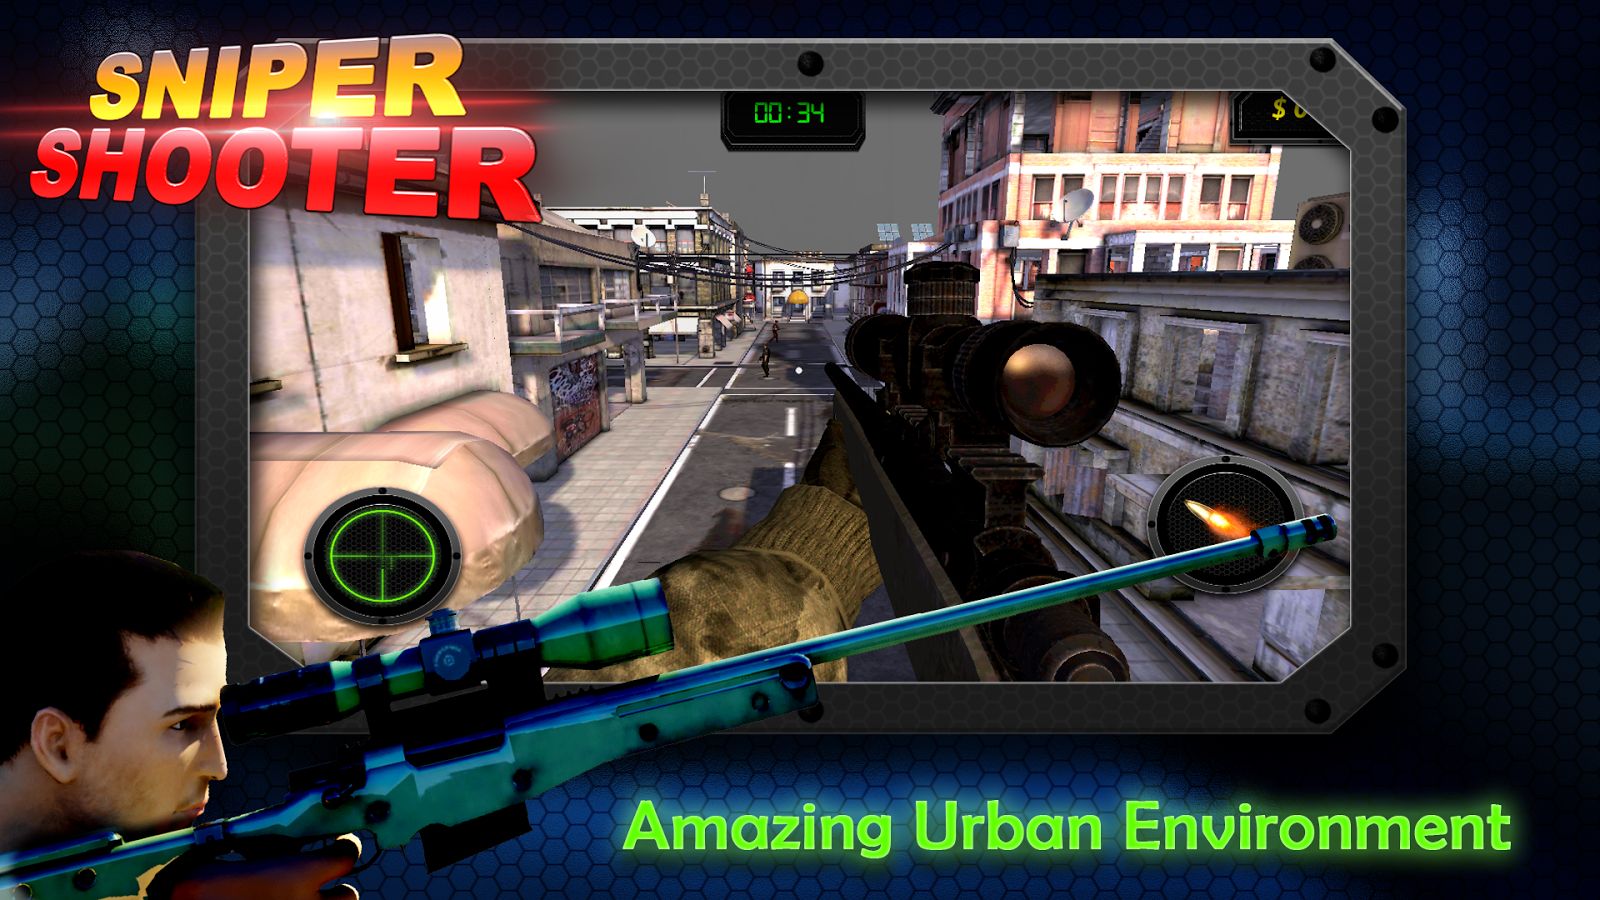 Sniper Shooter: The whole city is on fire, you have a mission to clear the  city with deadly gun